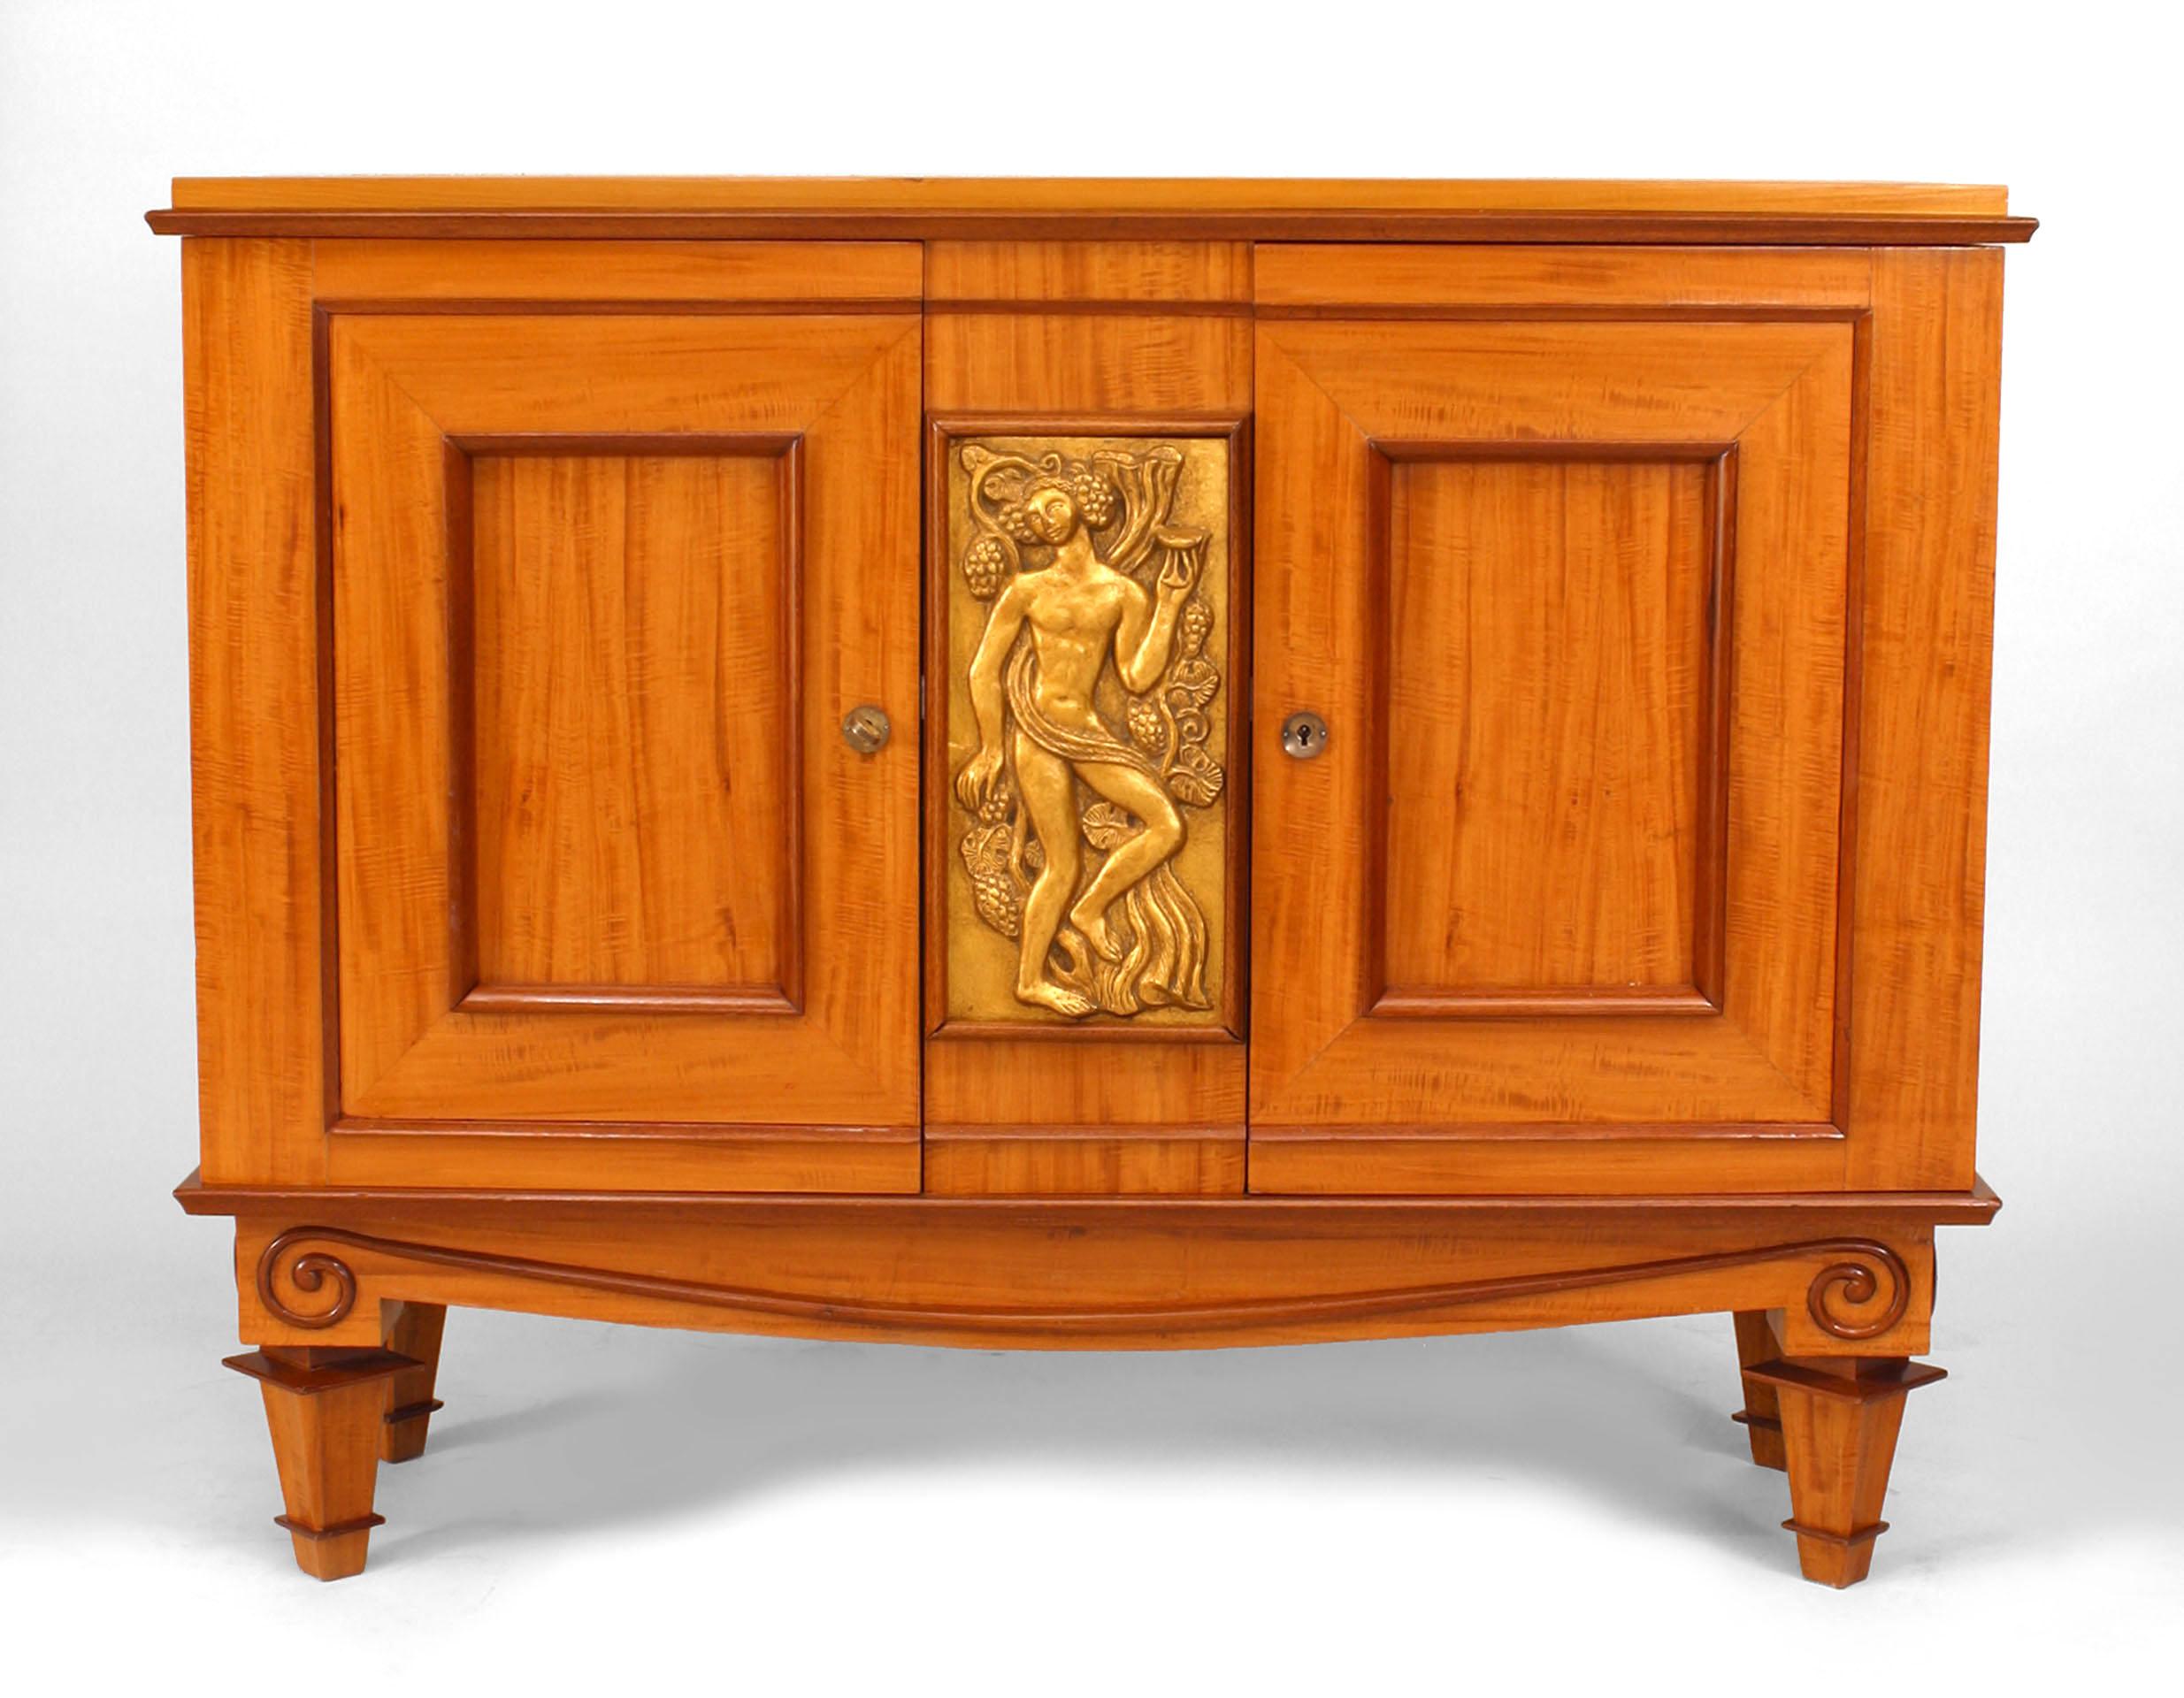 French Art Deco satinwood and mahogany with gilt trim door commode with a carved center panel with figural design. (Attributed to ATELIER ARBUS)
